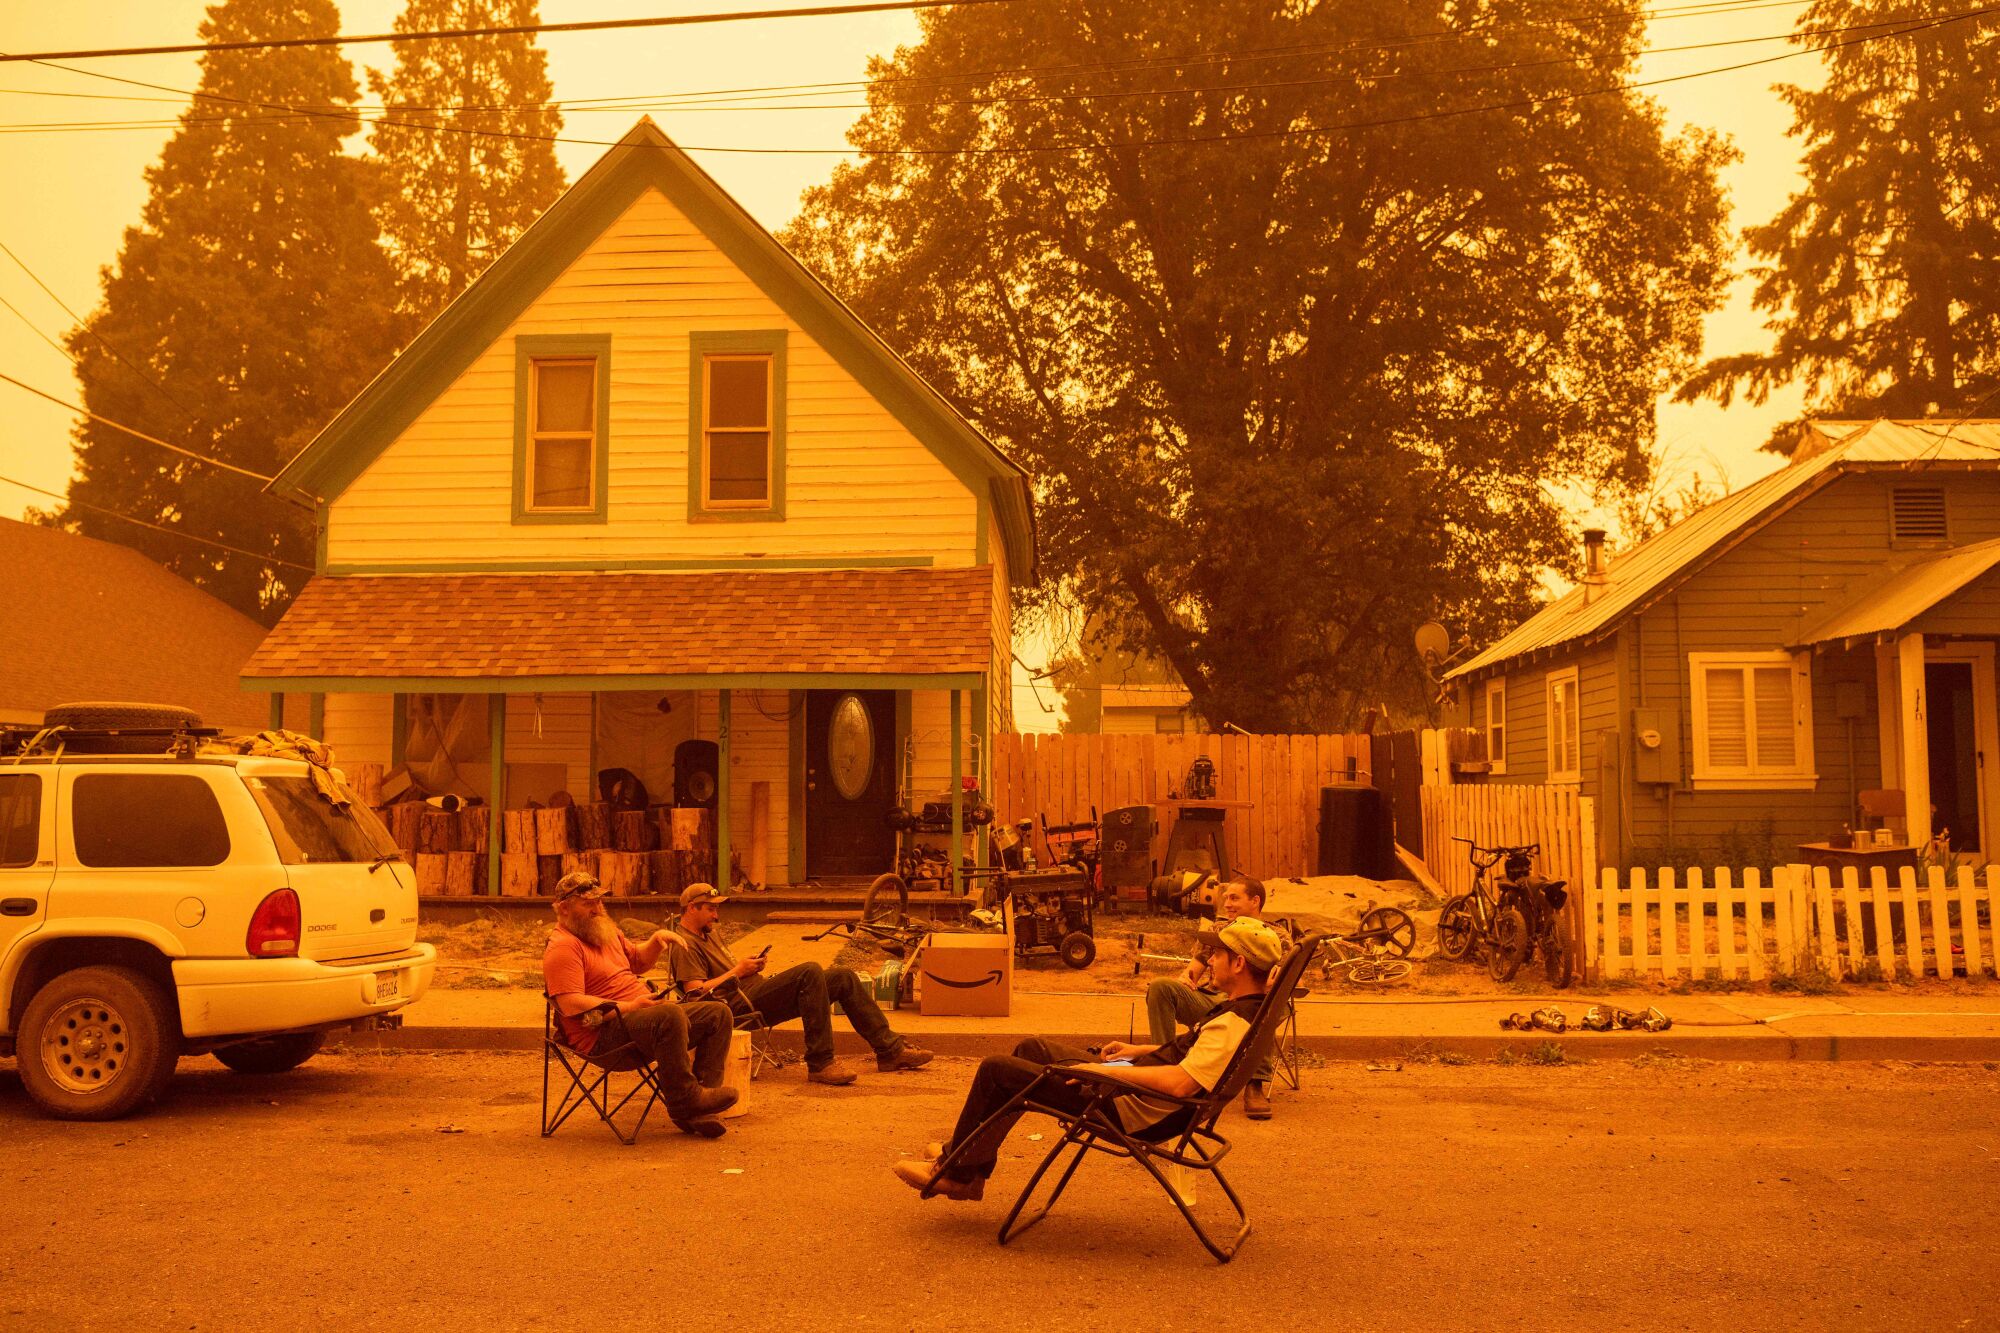 Residents sit in chairs in the street beneath an orange sky.